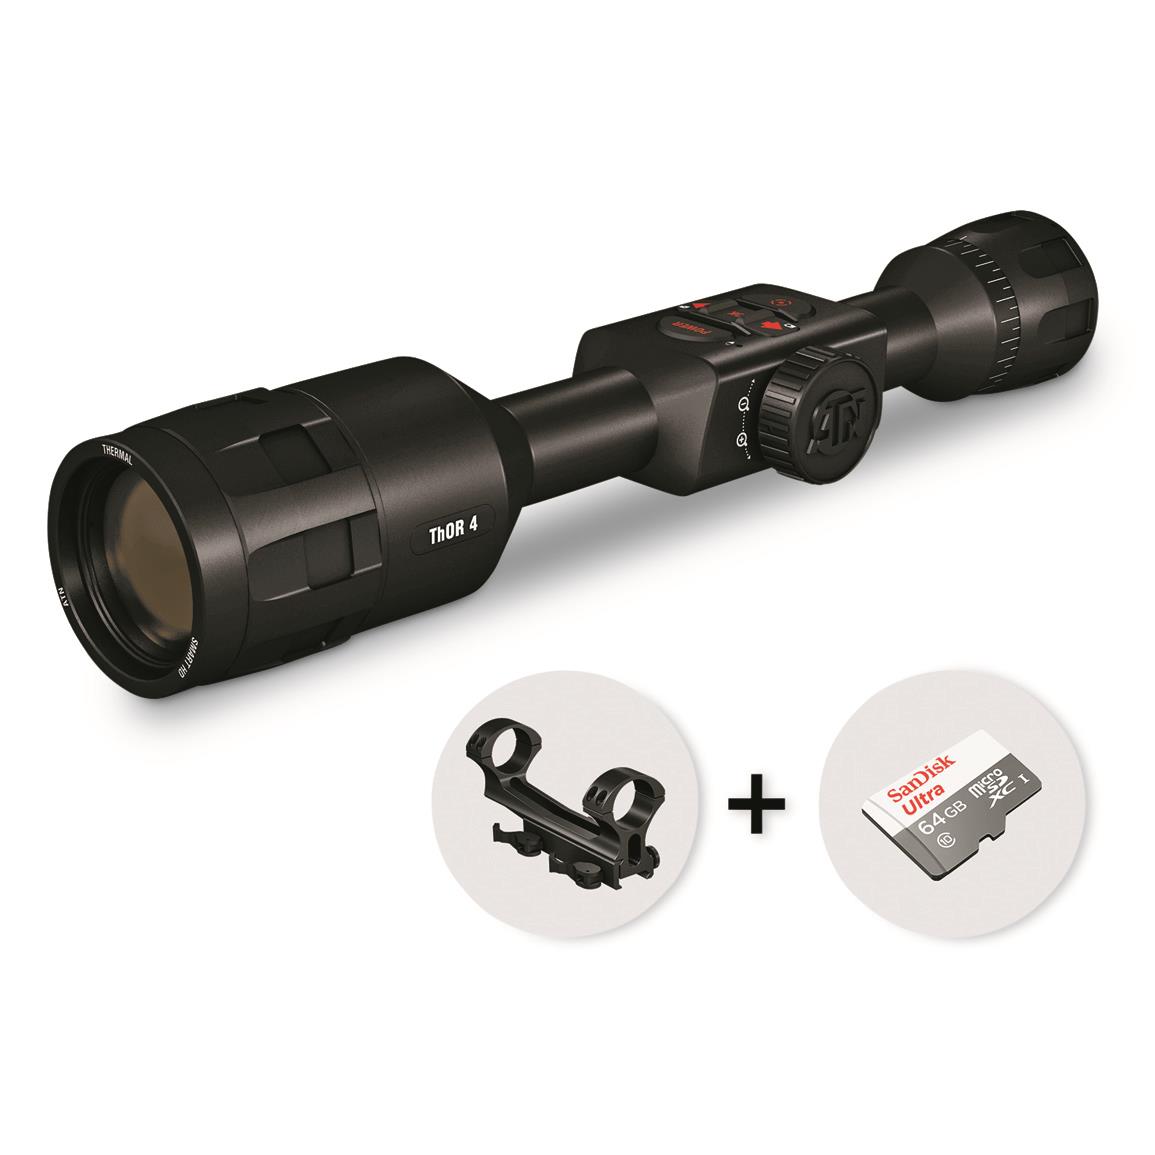 ATN ThOR 4 (640x480) 4-40x Smart HD Thermal Rifle Scope with Dual Ring Cantilever Mount & SD Card